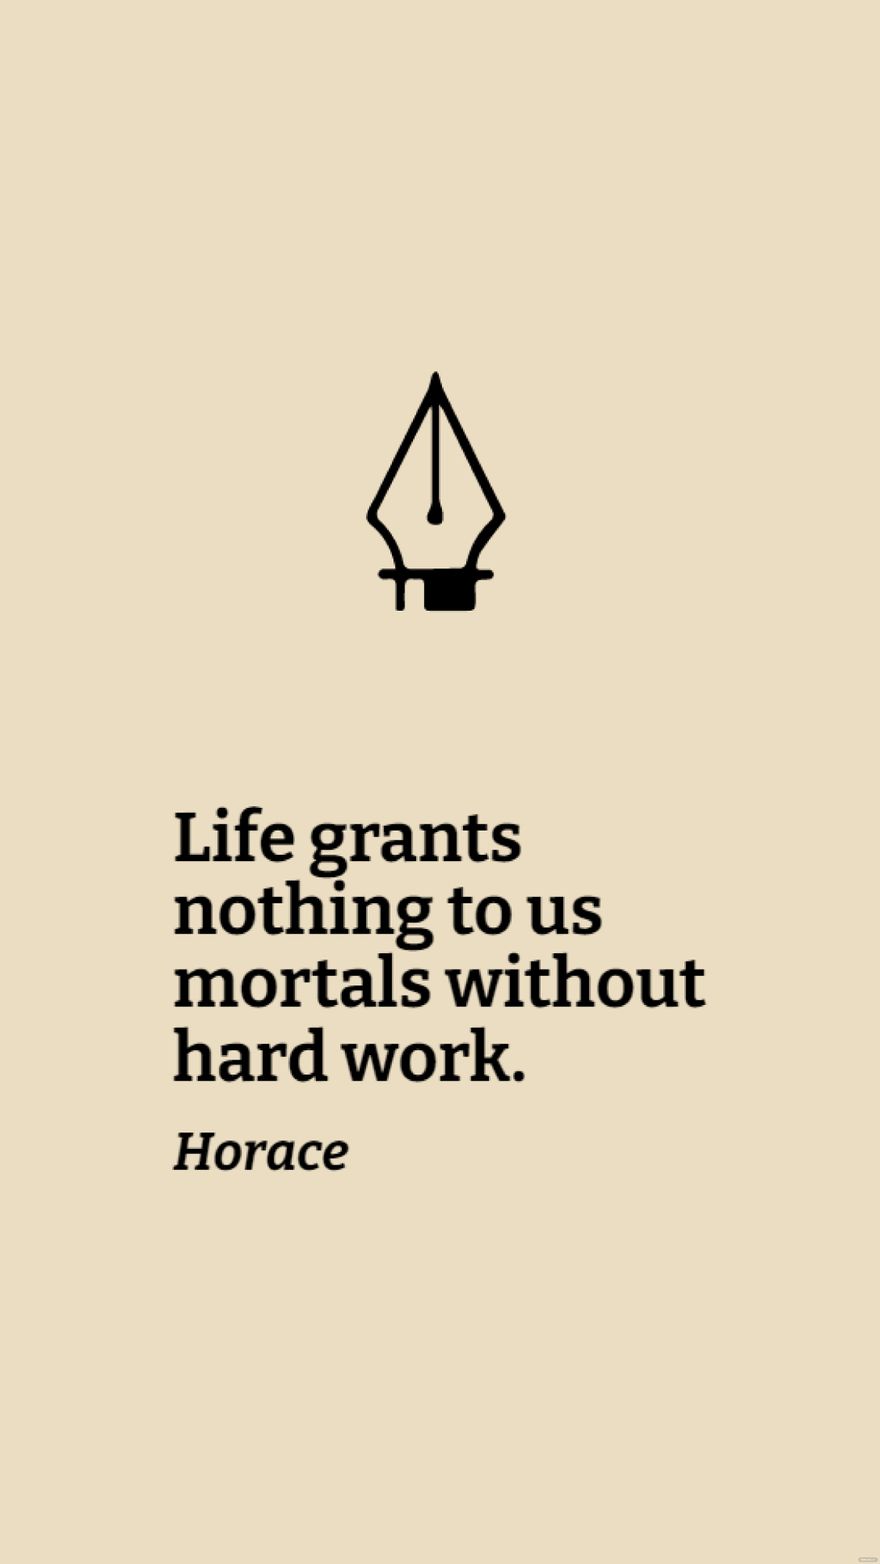 Free Horace - Life grants nothing to us mortals without hard work. in JPG